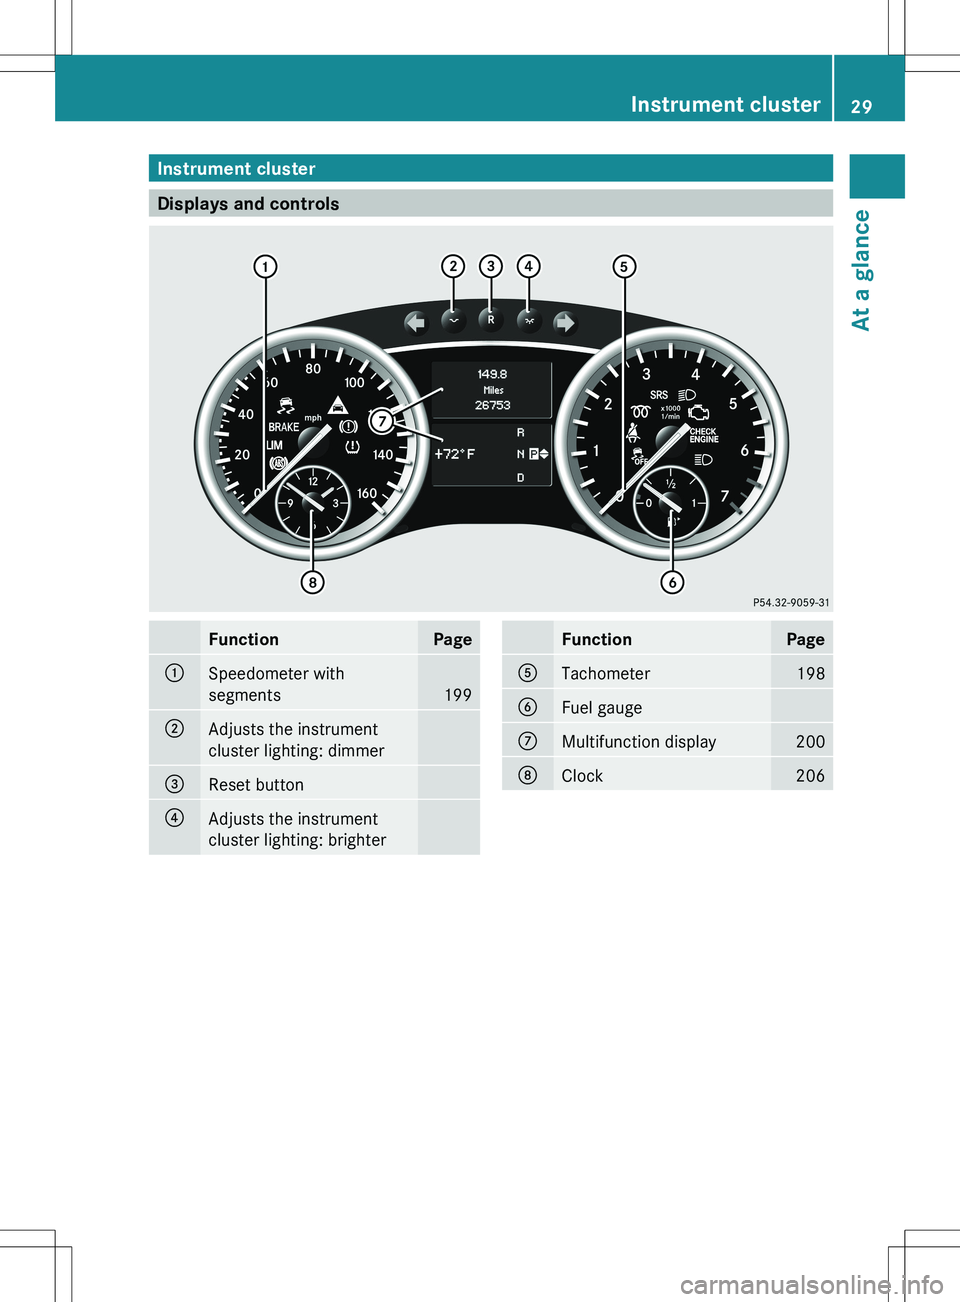 MERCEDES-BENZ R-CLASS FAMILY TOURER 2012  Owners Manual Instrument cluster
Displays and controls
FunctionPage:Speedometer with
segments
199
;Adjusts the instrument
cluster lighting: dimmer=Reset button?Adjusts the instrument
cluster lighting: brighterFunct